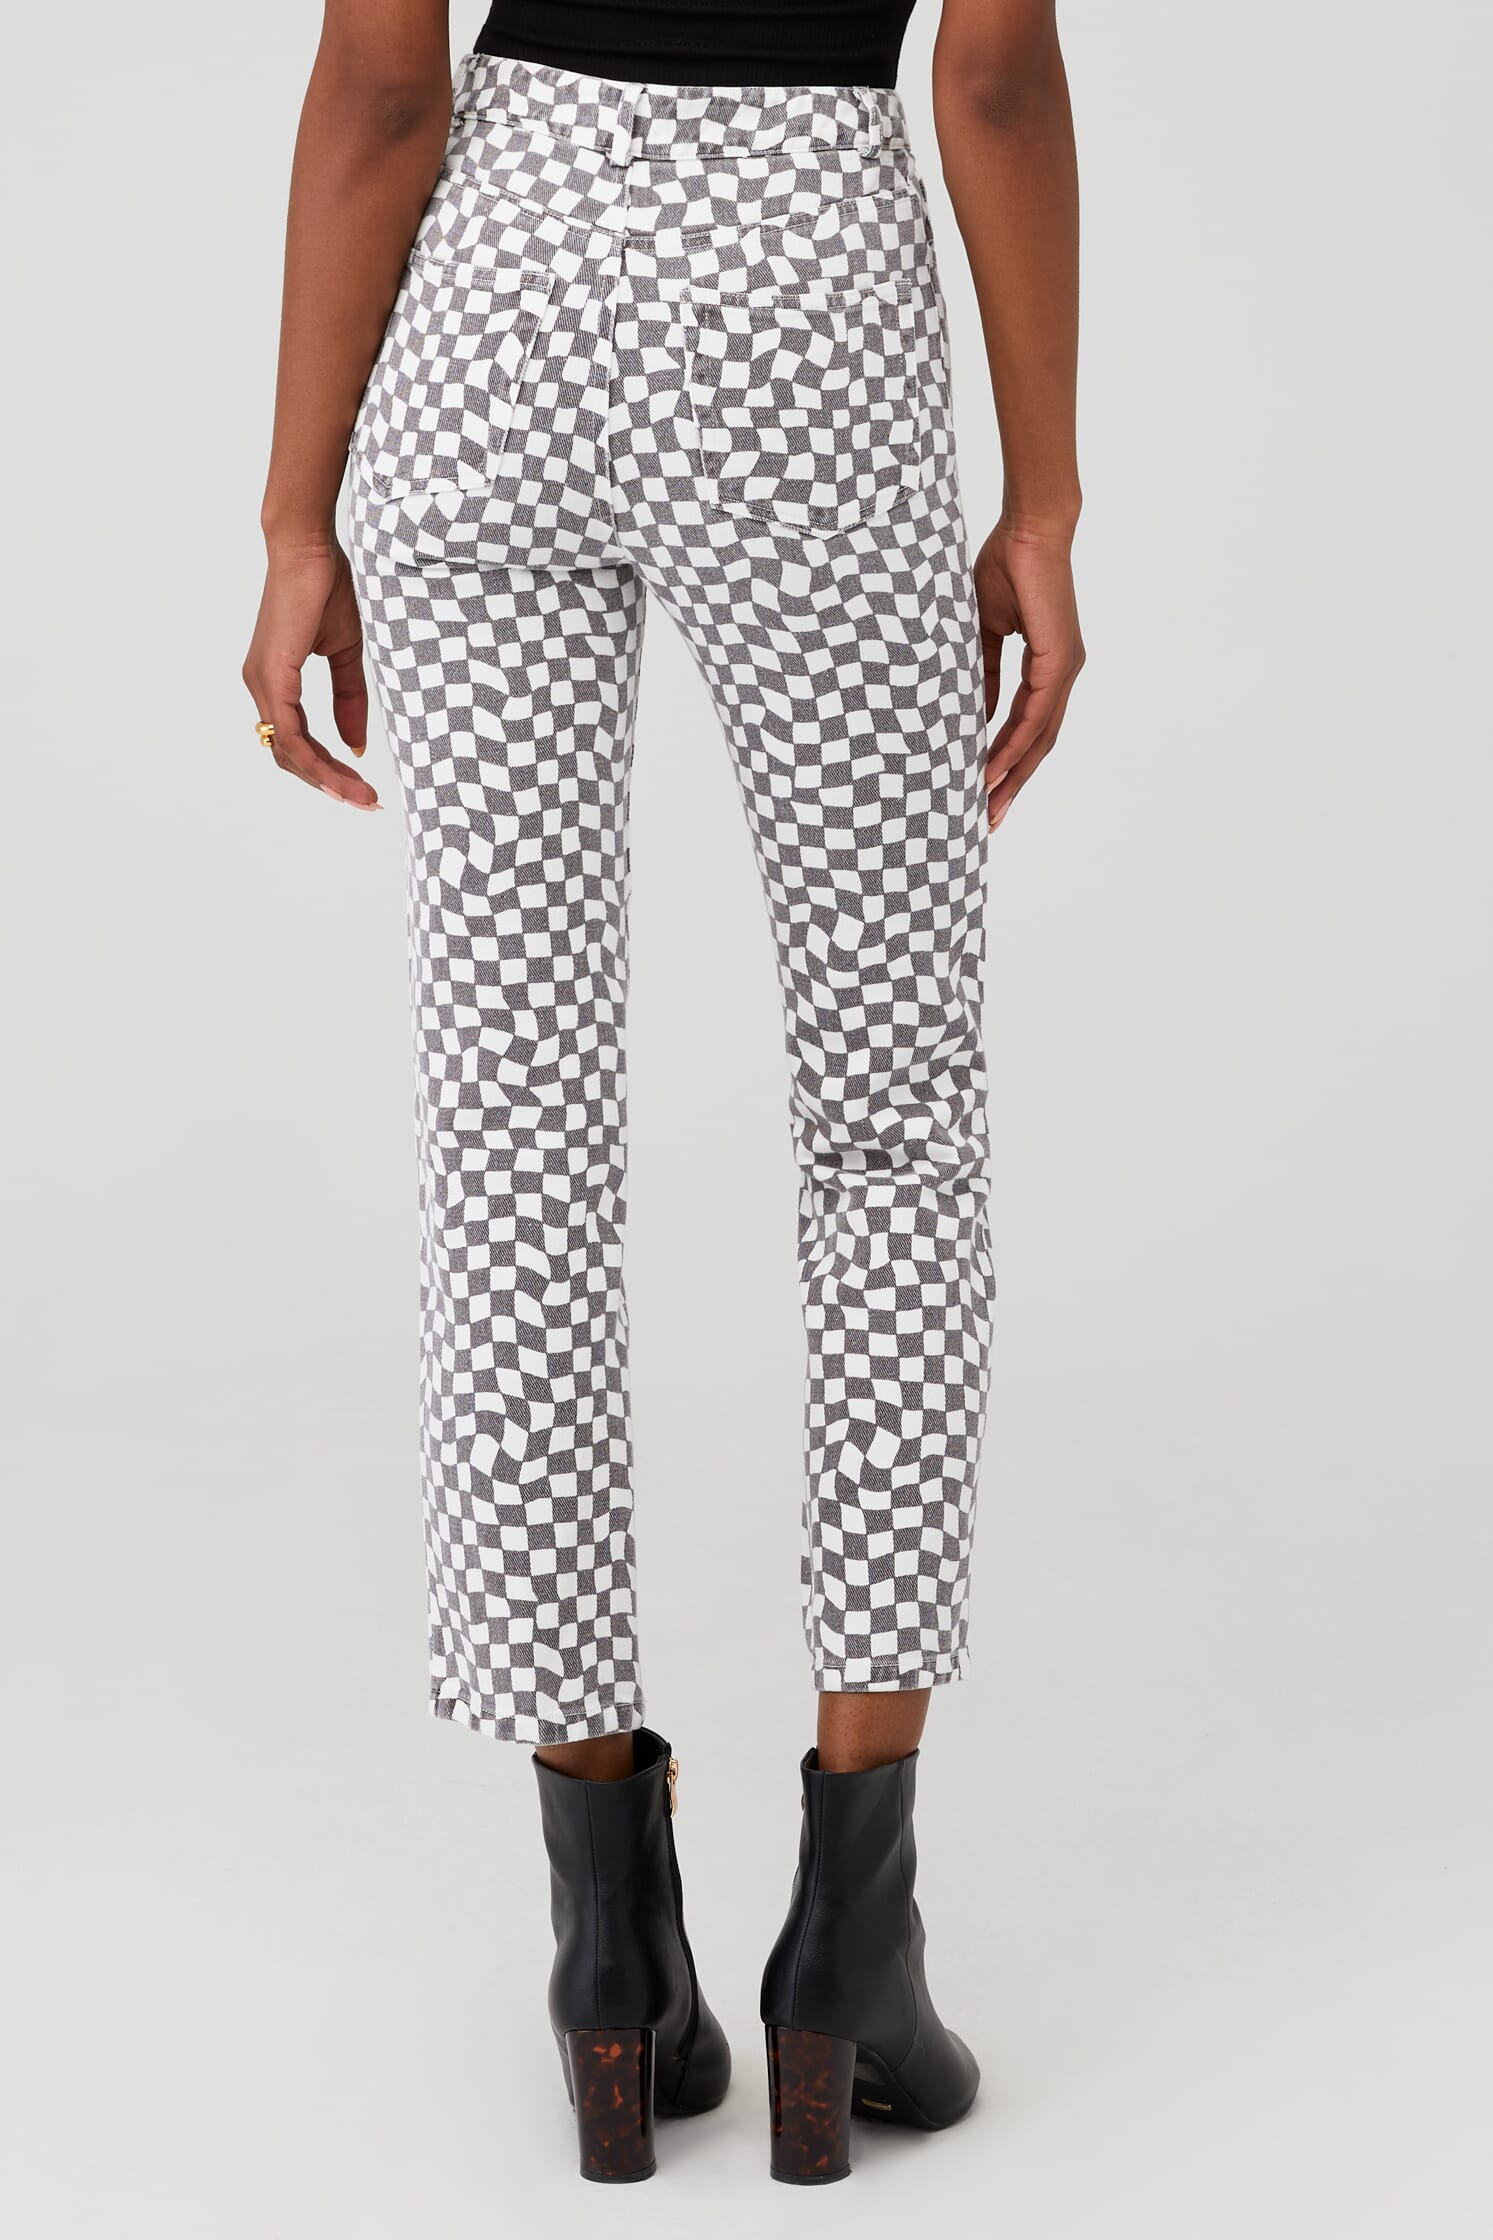 PEPPERMAYO, Electric Avenue Pants in Warped Check